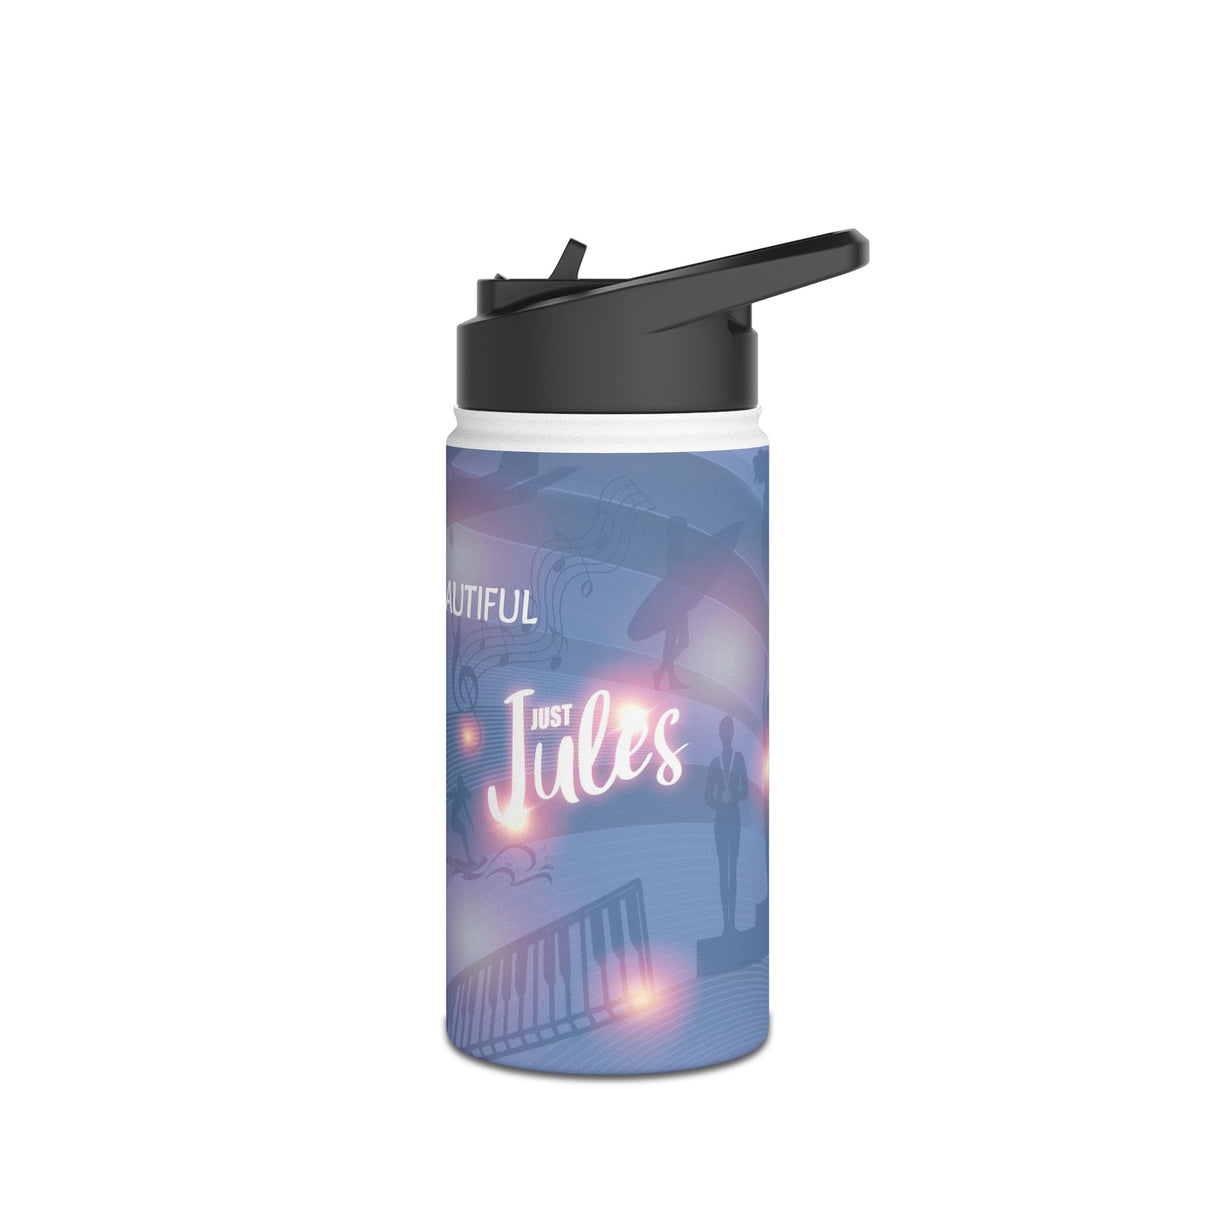 JUSTJULES - You Are Beautiful Sports Bottle - Chalklife, LLC